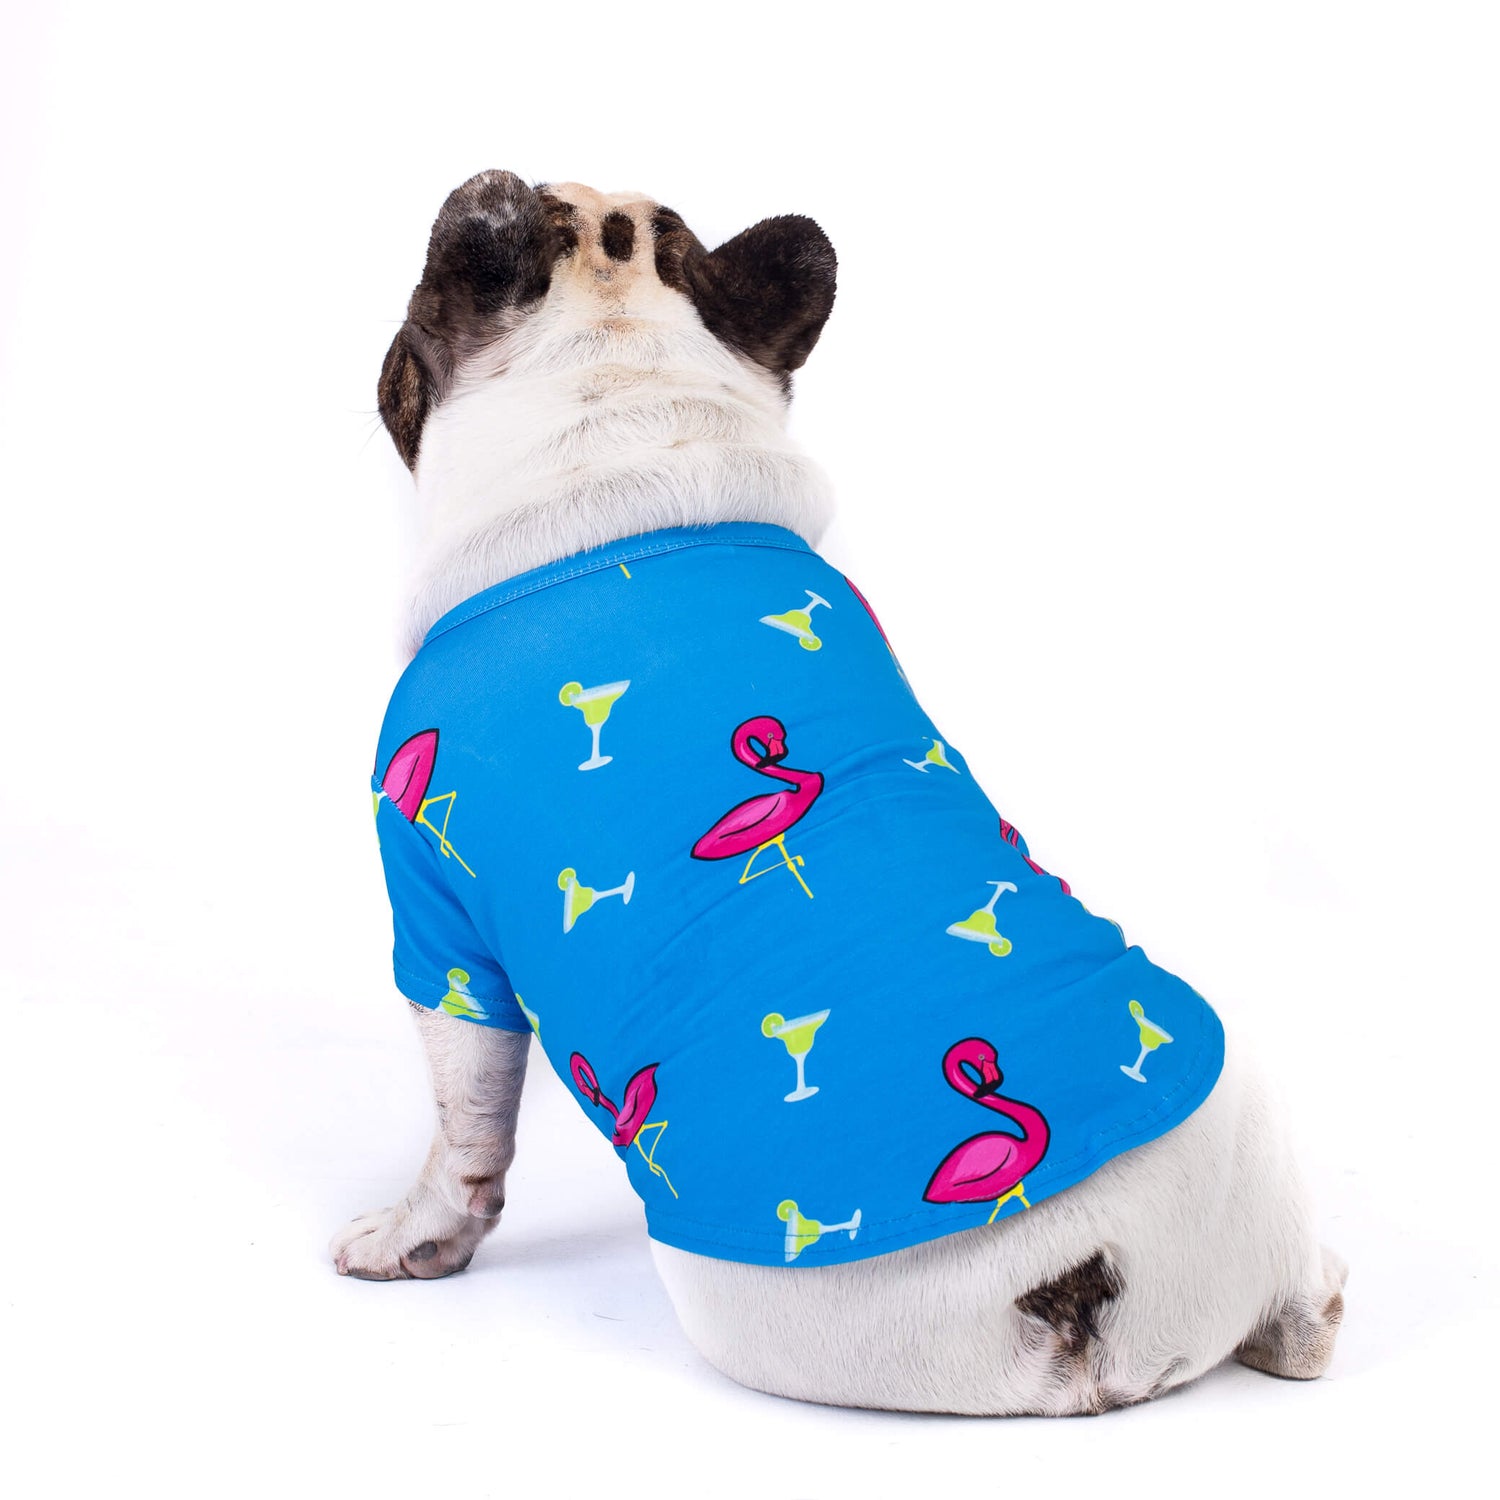 A brindle pied French Bulldog wearing a Vibrant Hound "Flamingo Splash" shirt, which is blue with pink flamingos and margaritas printed on it. The dog is facing away from the camera.